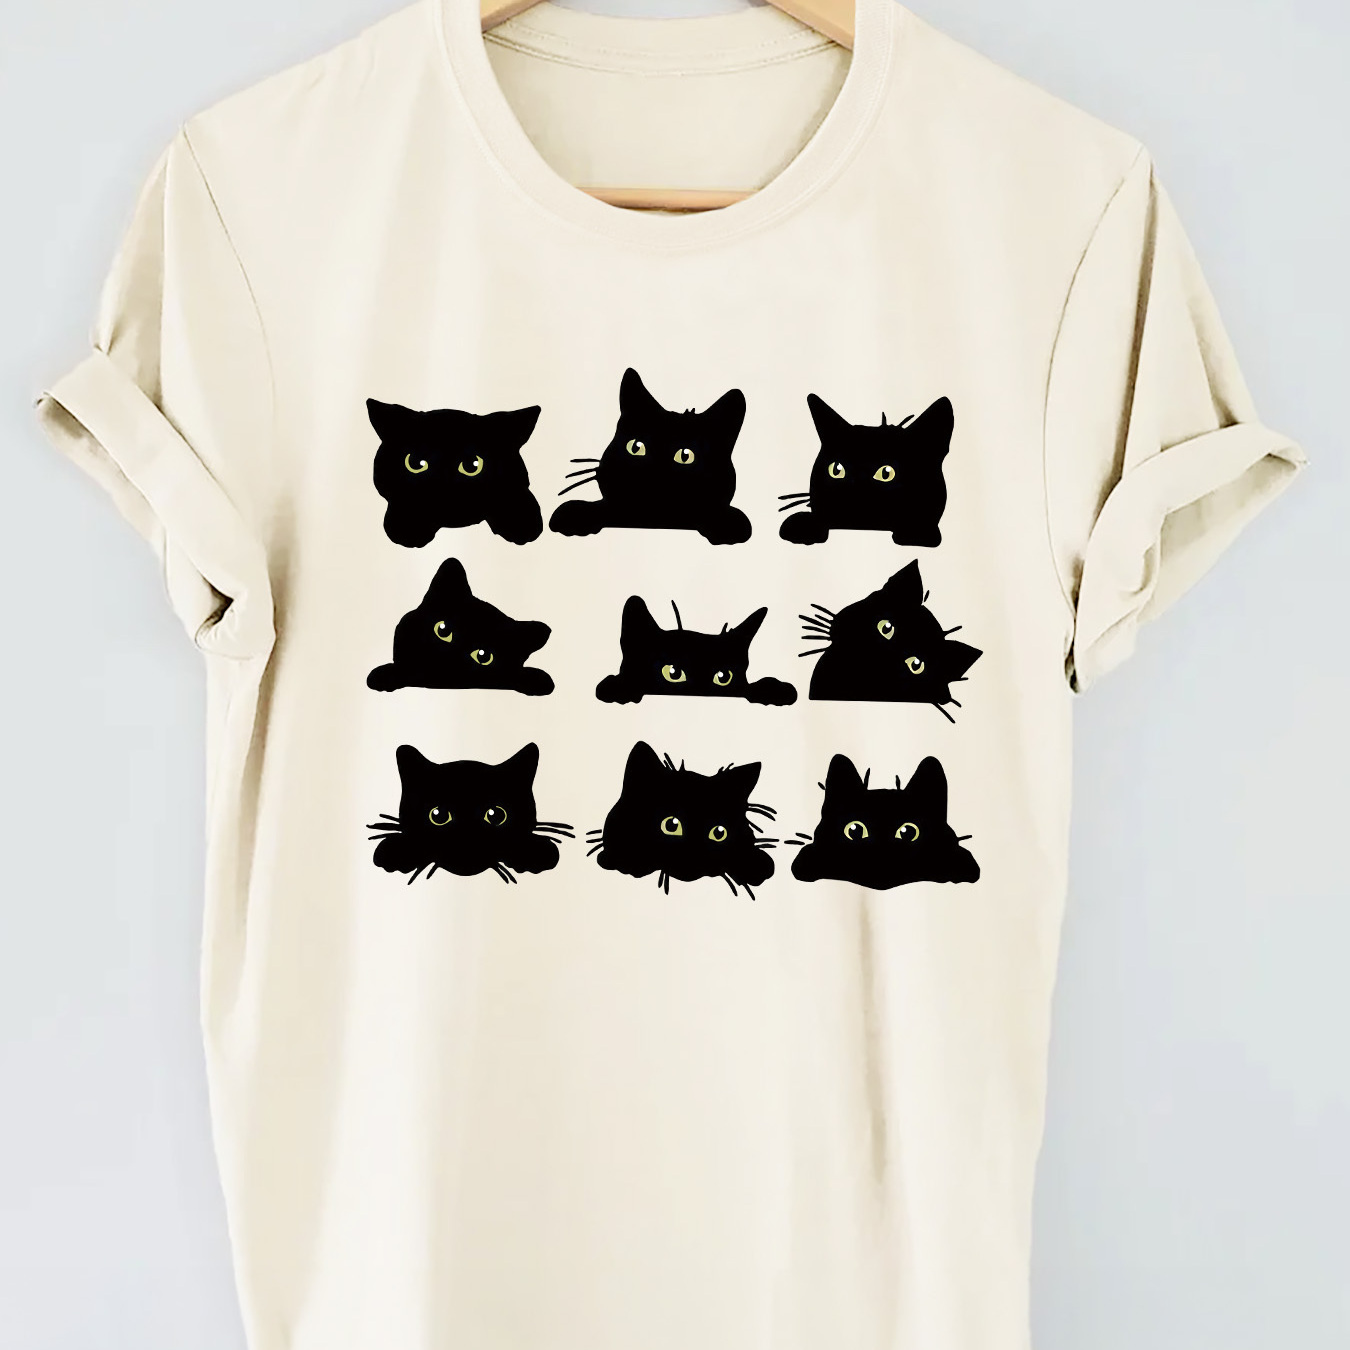 

Cats Graphic Print Knitted T-shirt, Short Sleeve Crew Neck Casual Top For Summer & Spring, Women's Clothing